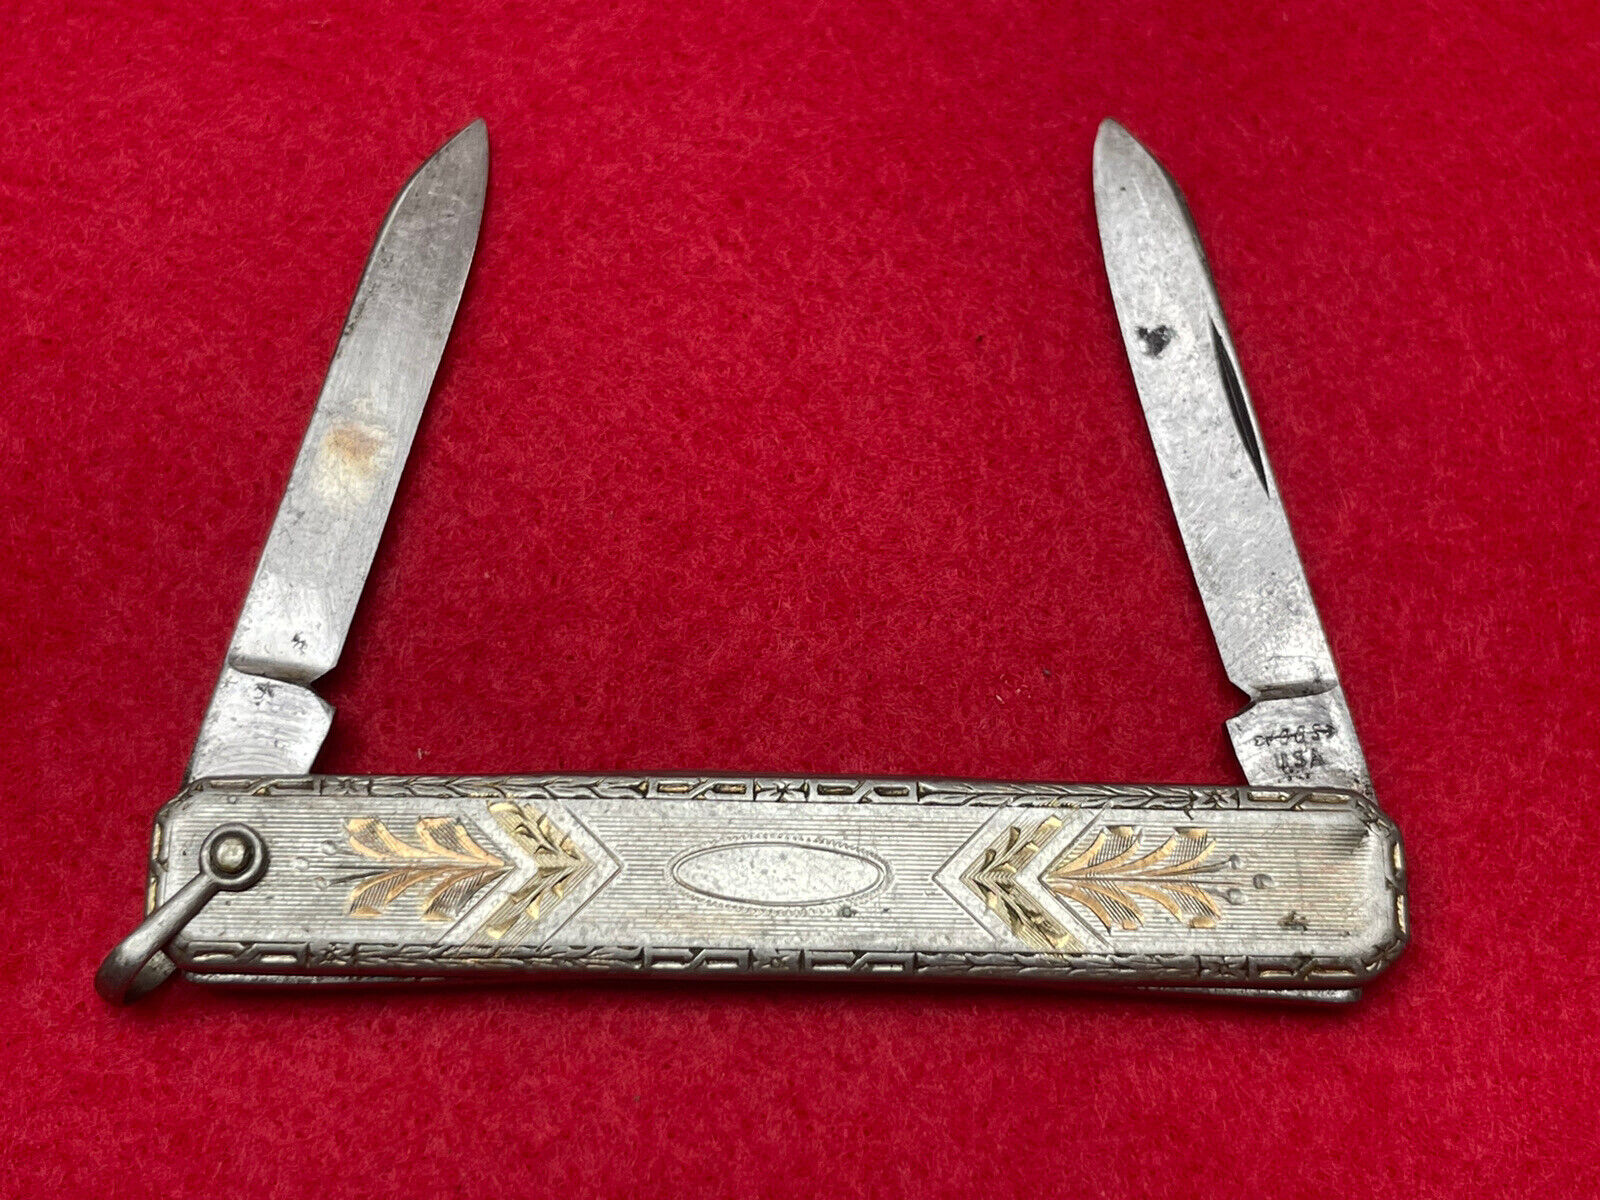 VTG EARLY CENTURY ORNATE GOLD INLAY ETCHED OMO INITIAL 2 BLADE FOLDING KNIFE